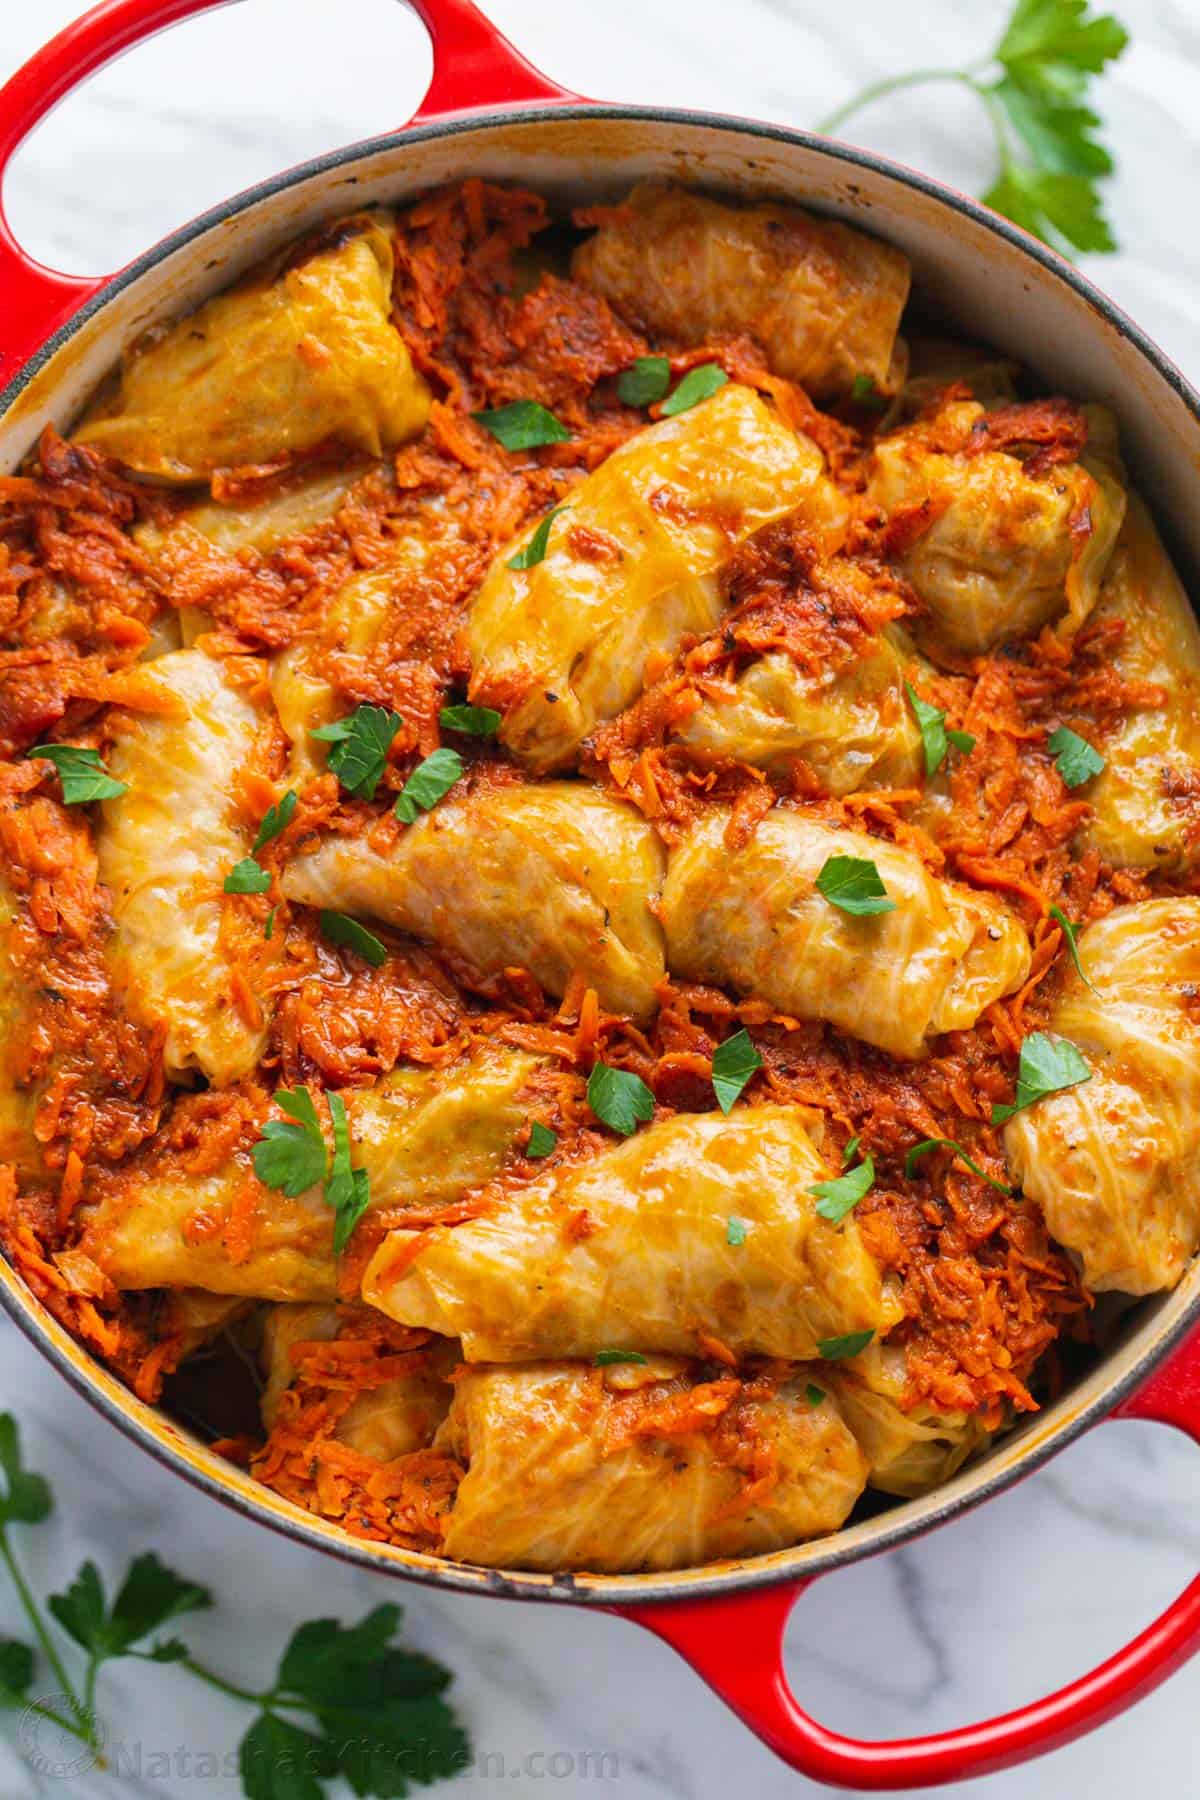 Overhead view of stuffed cabbage rolls inside a red Dutch oven, covered in Podliva sauce.